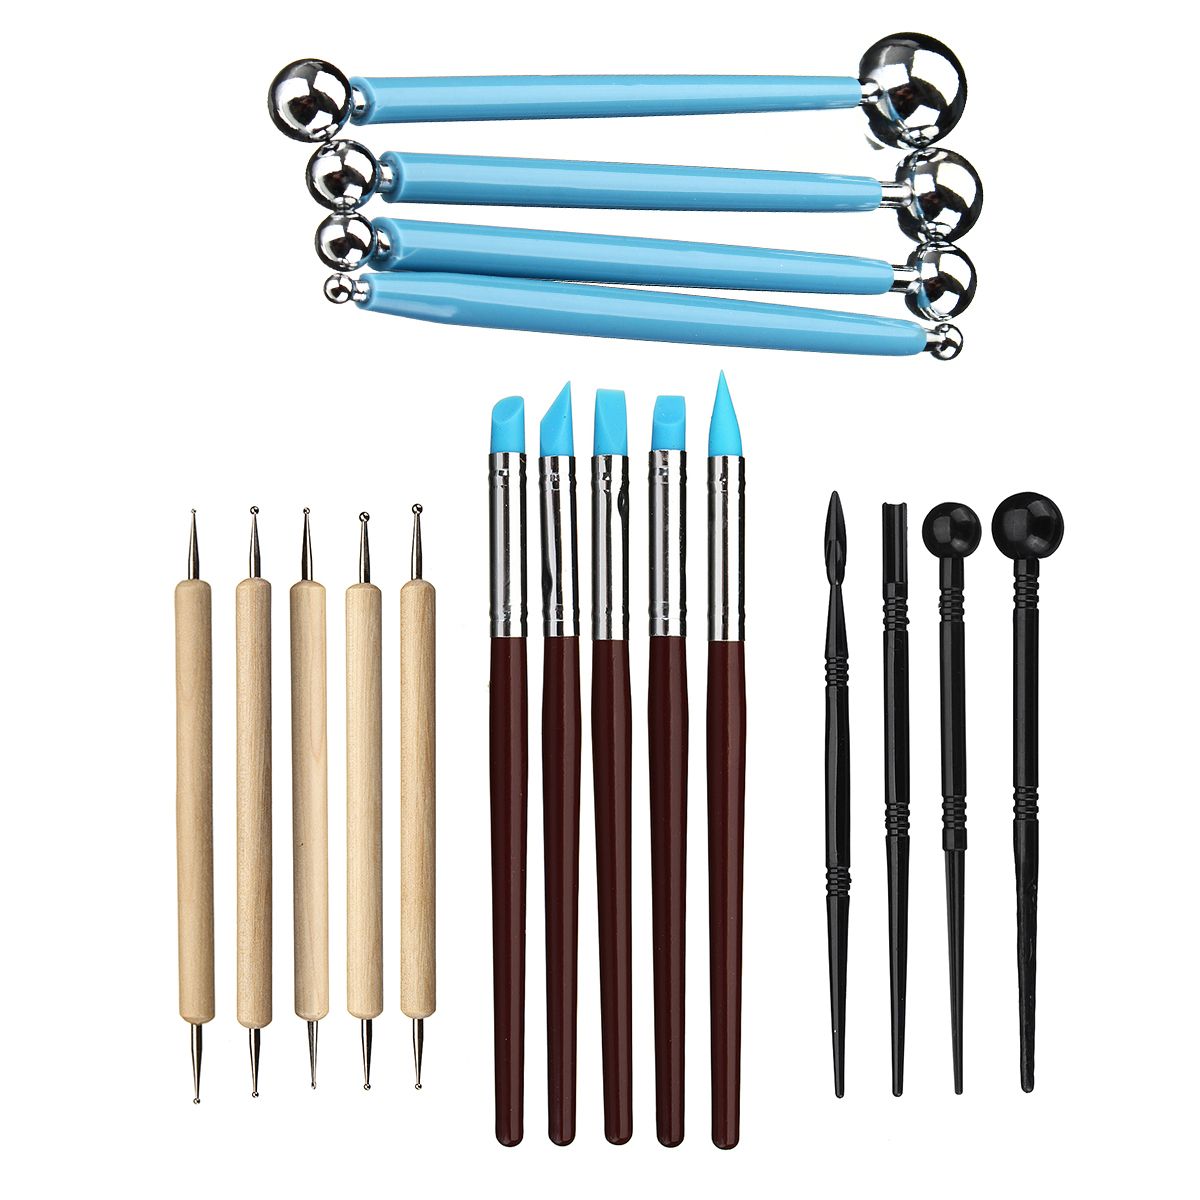 Ball-Stylus-Dotting-Tools-Clay-Pottery-Modeling-Carving-Rock-Ceramics-Painting-Kit-1448224